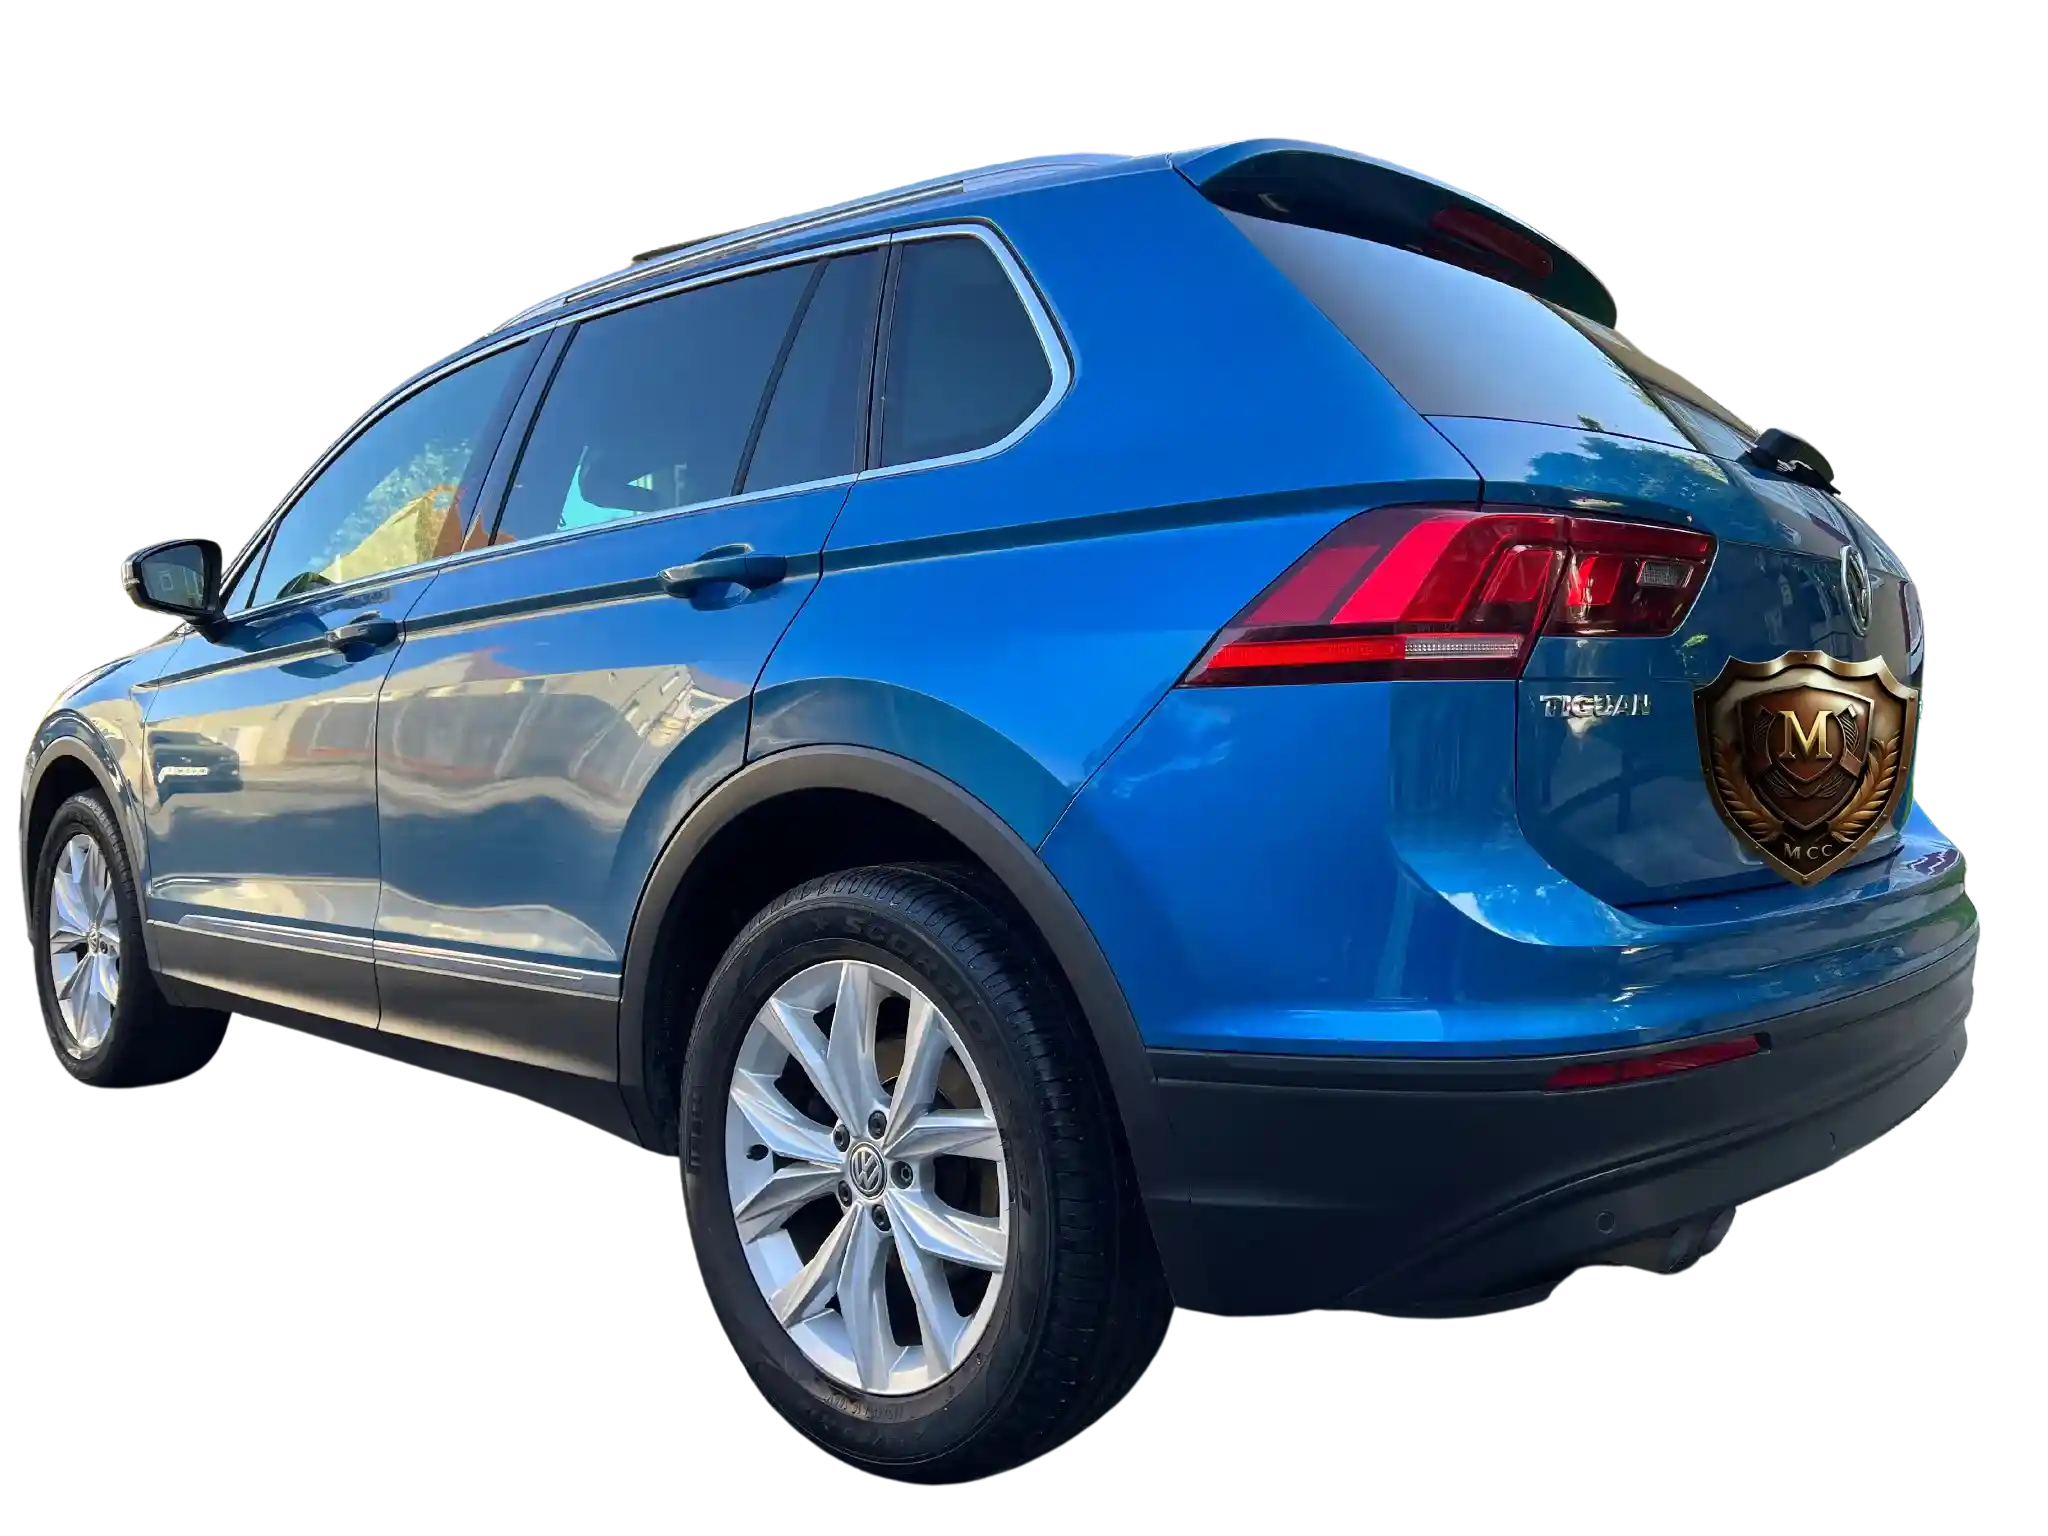 Eco-friendly waterless valeting of a Volkswagen Tiguan 4Motion in Cobham, enhancing its rugged elegance and reflecting corporate environmental values.